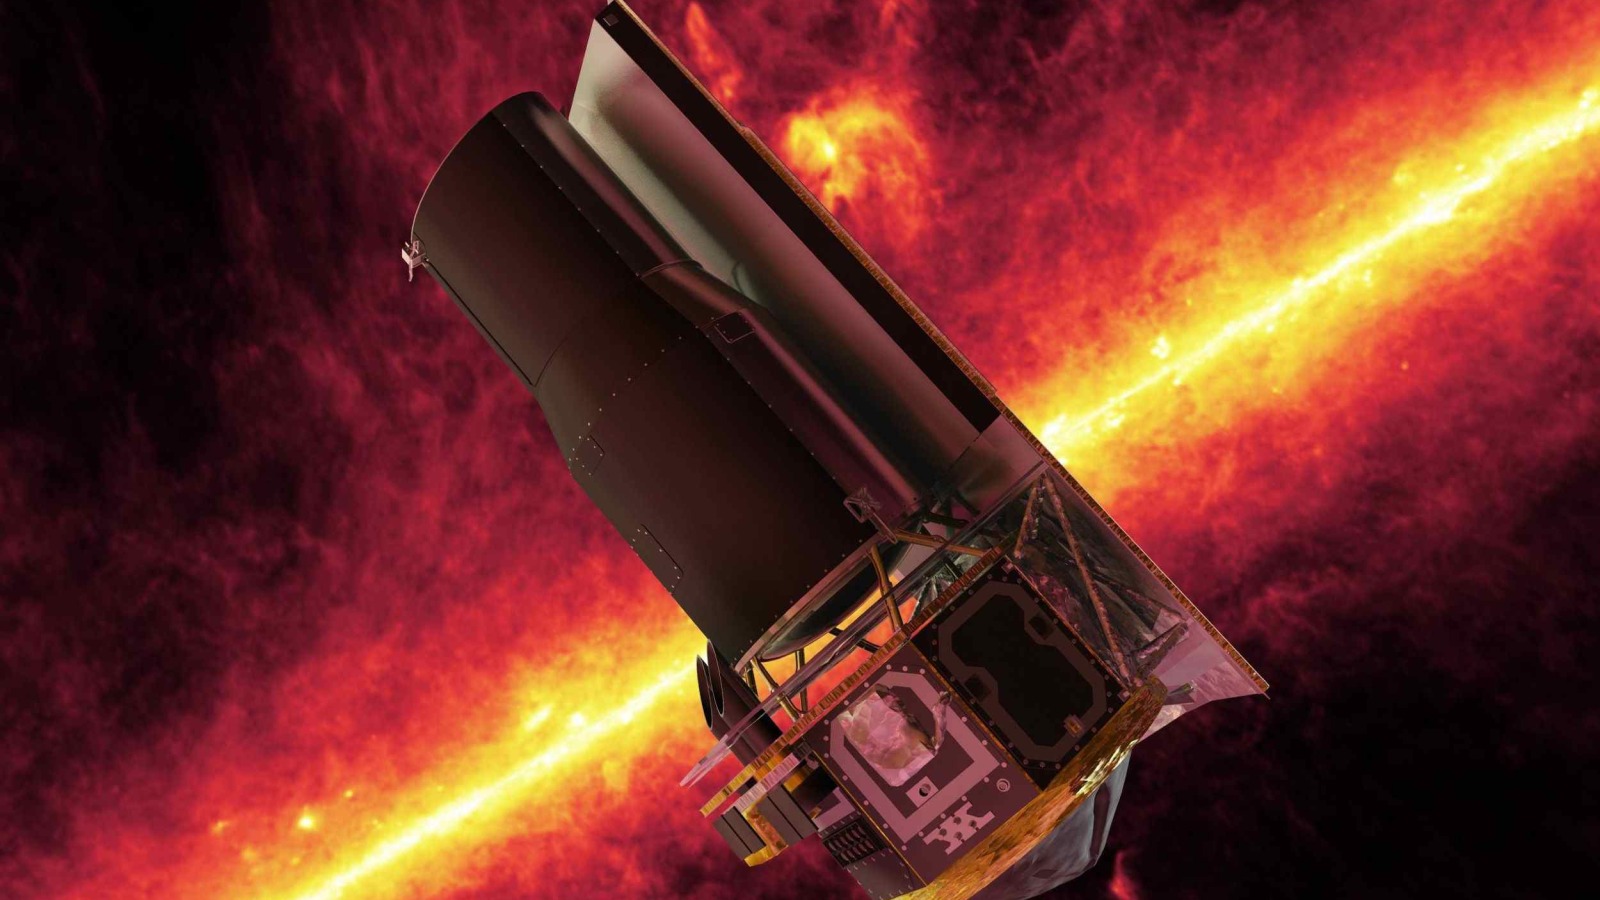 A photographic image of NASA’s Spitzer Space Telescope, which will be launched in 2020.